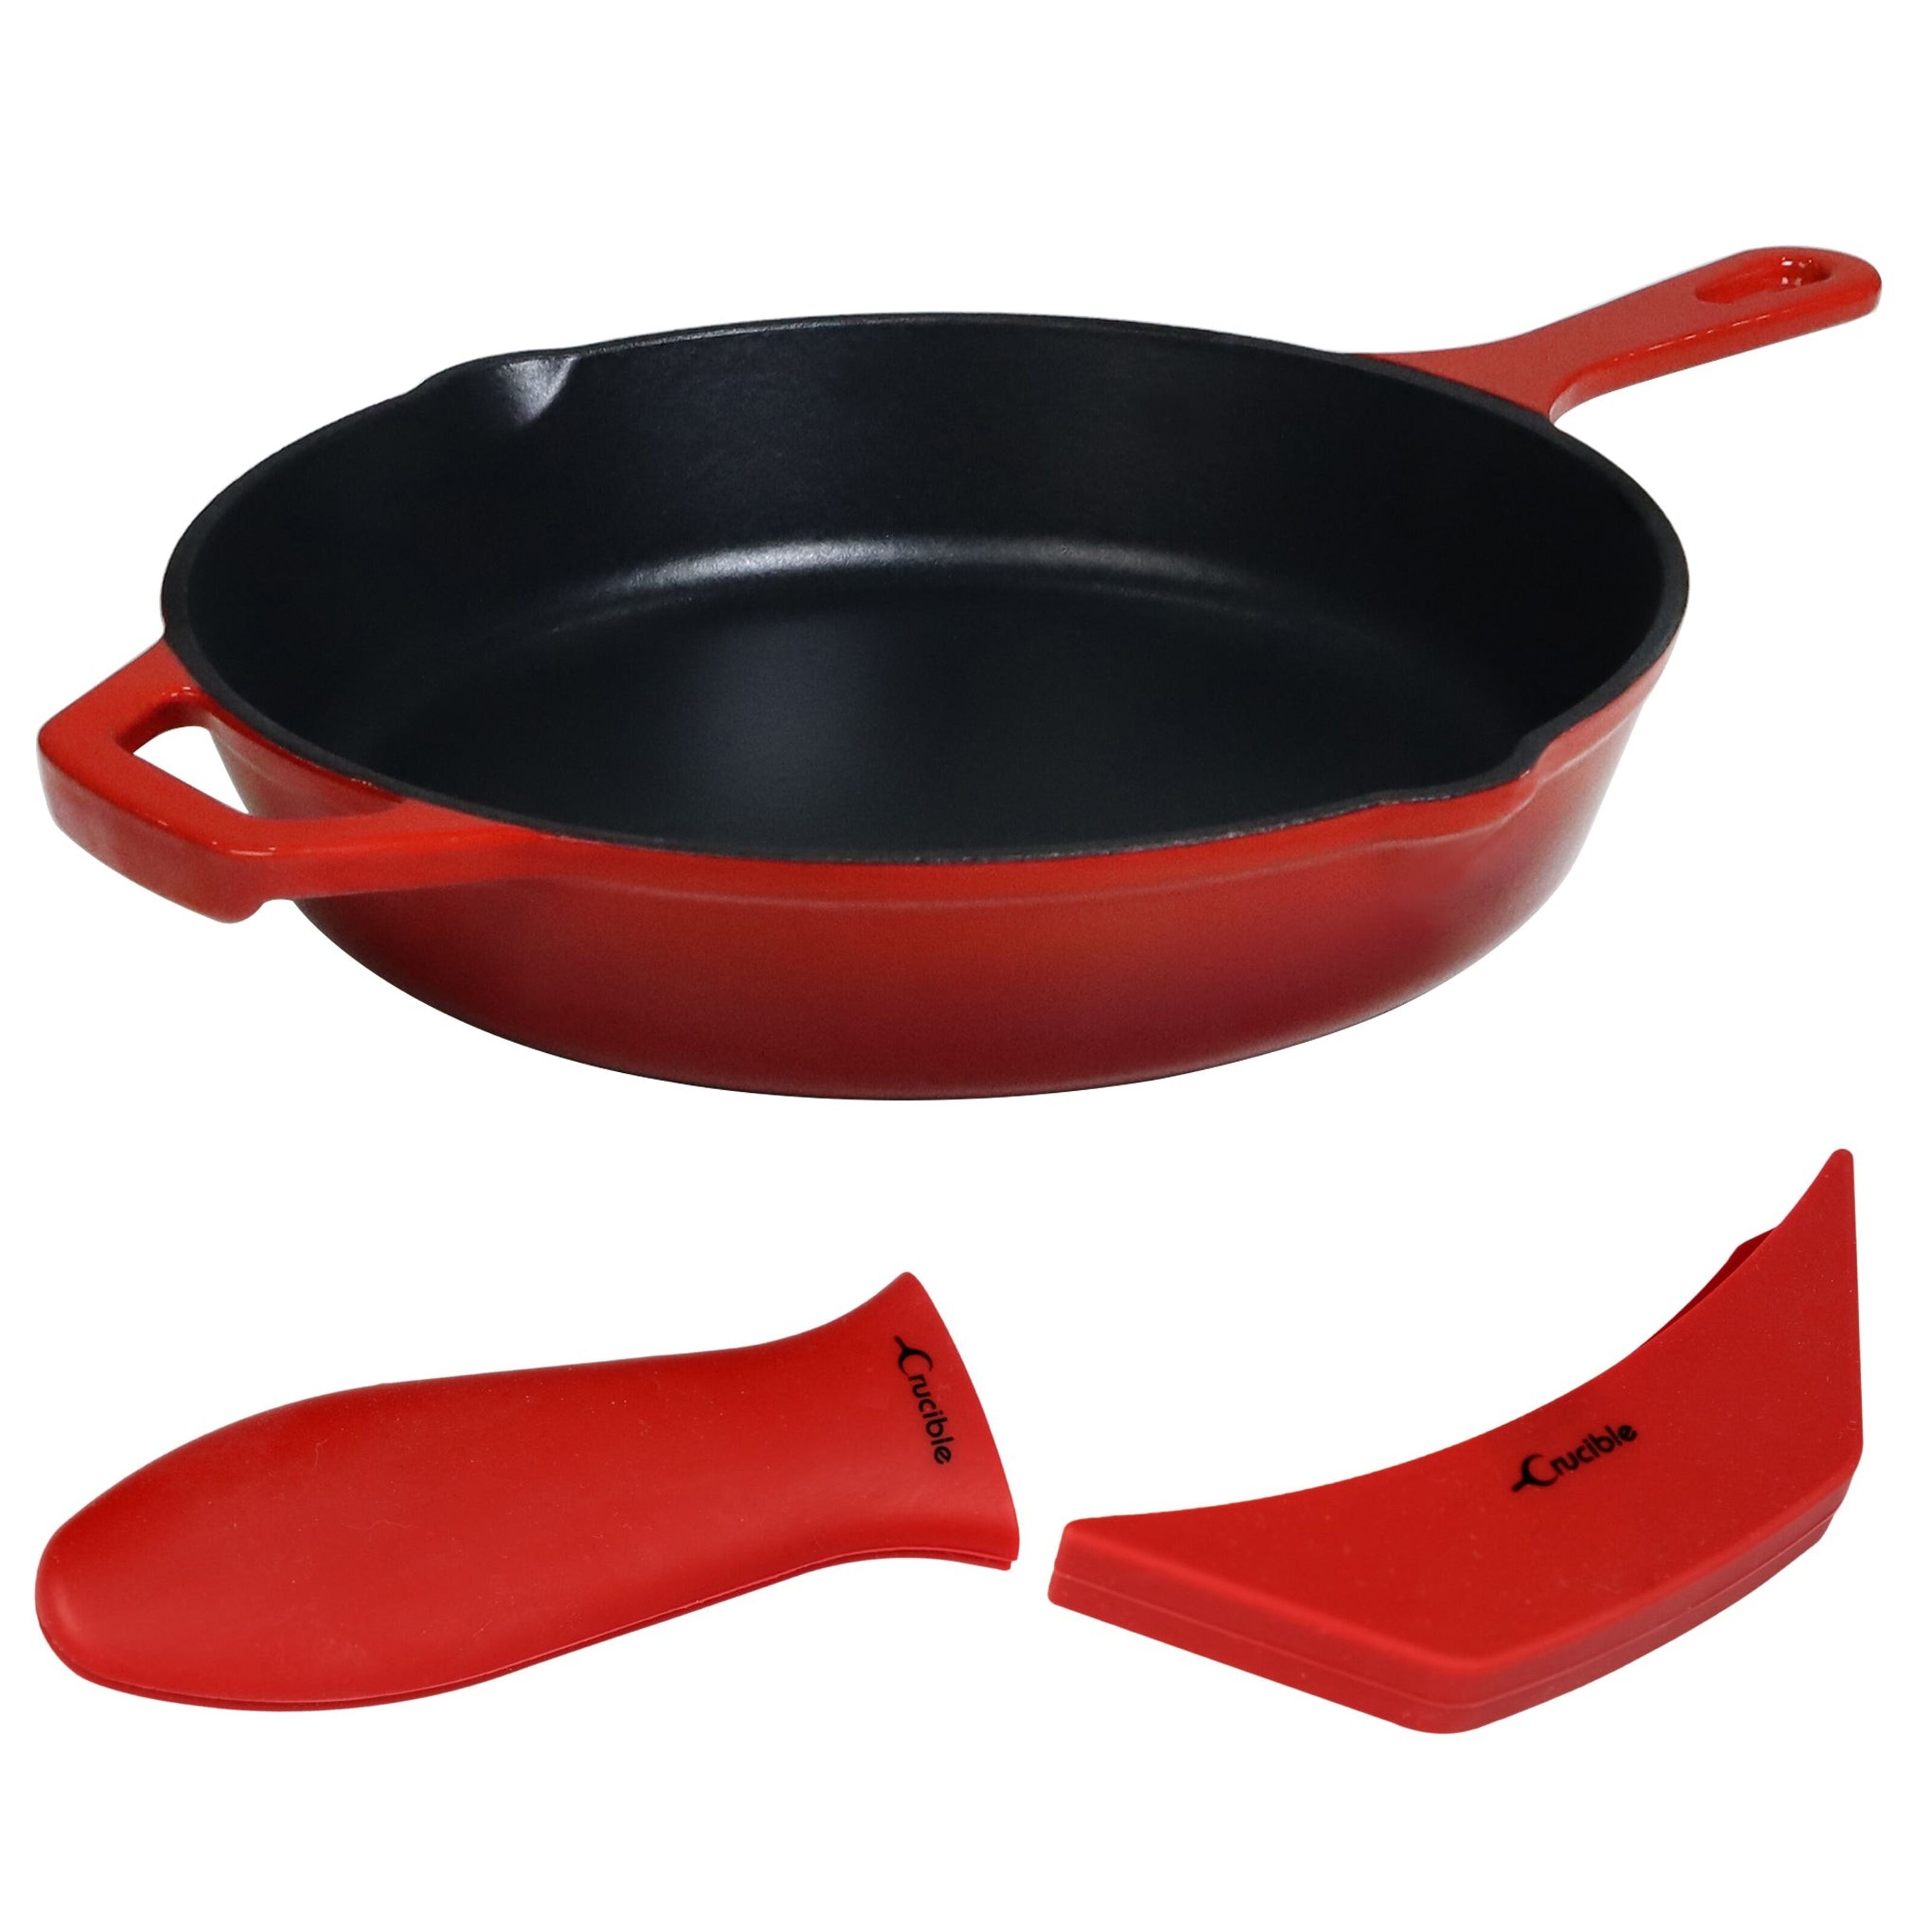 Frying pan 2 handles 26 cm Glamour Stone Stainless Steel - Glamour Stone -  Cookware